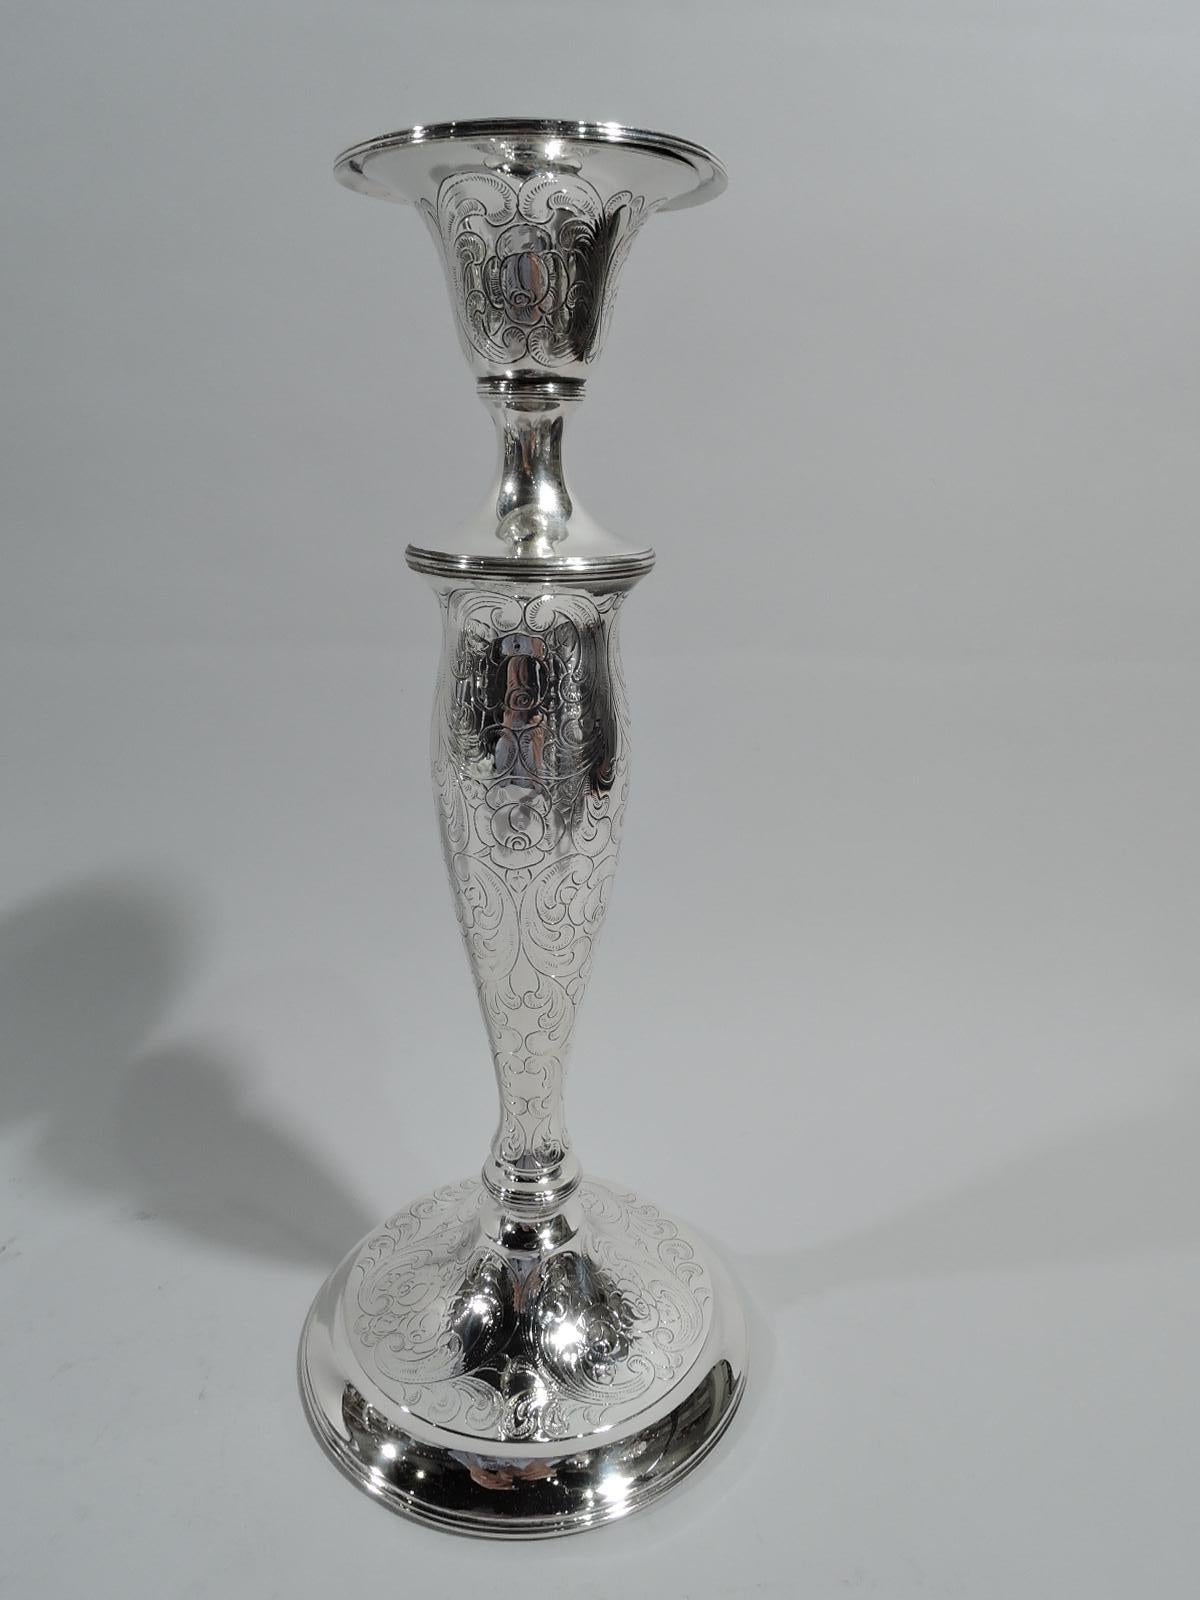 Pair of Edwardian Art Nouveau sterling silver candlesticks. Each: Tapering socket with detachable bobeche on ovoid shaft with reeded base knop on raised foot. Engraved ornament in form of soft and loose leaves and scrolls. Fully marked including